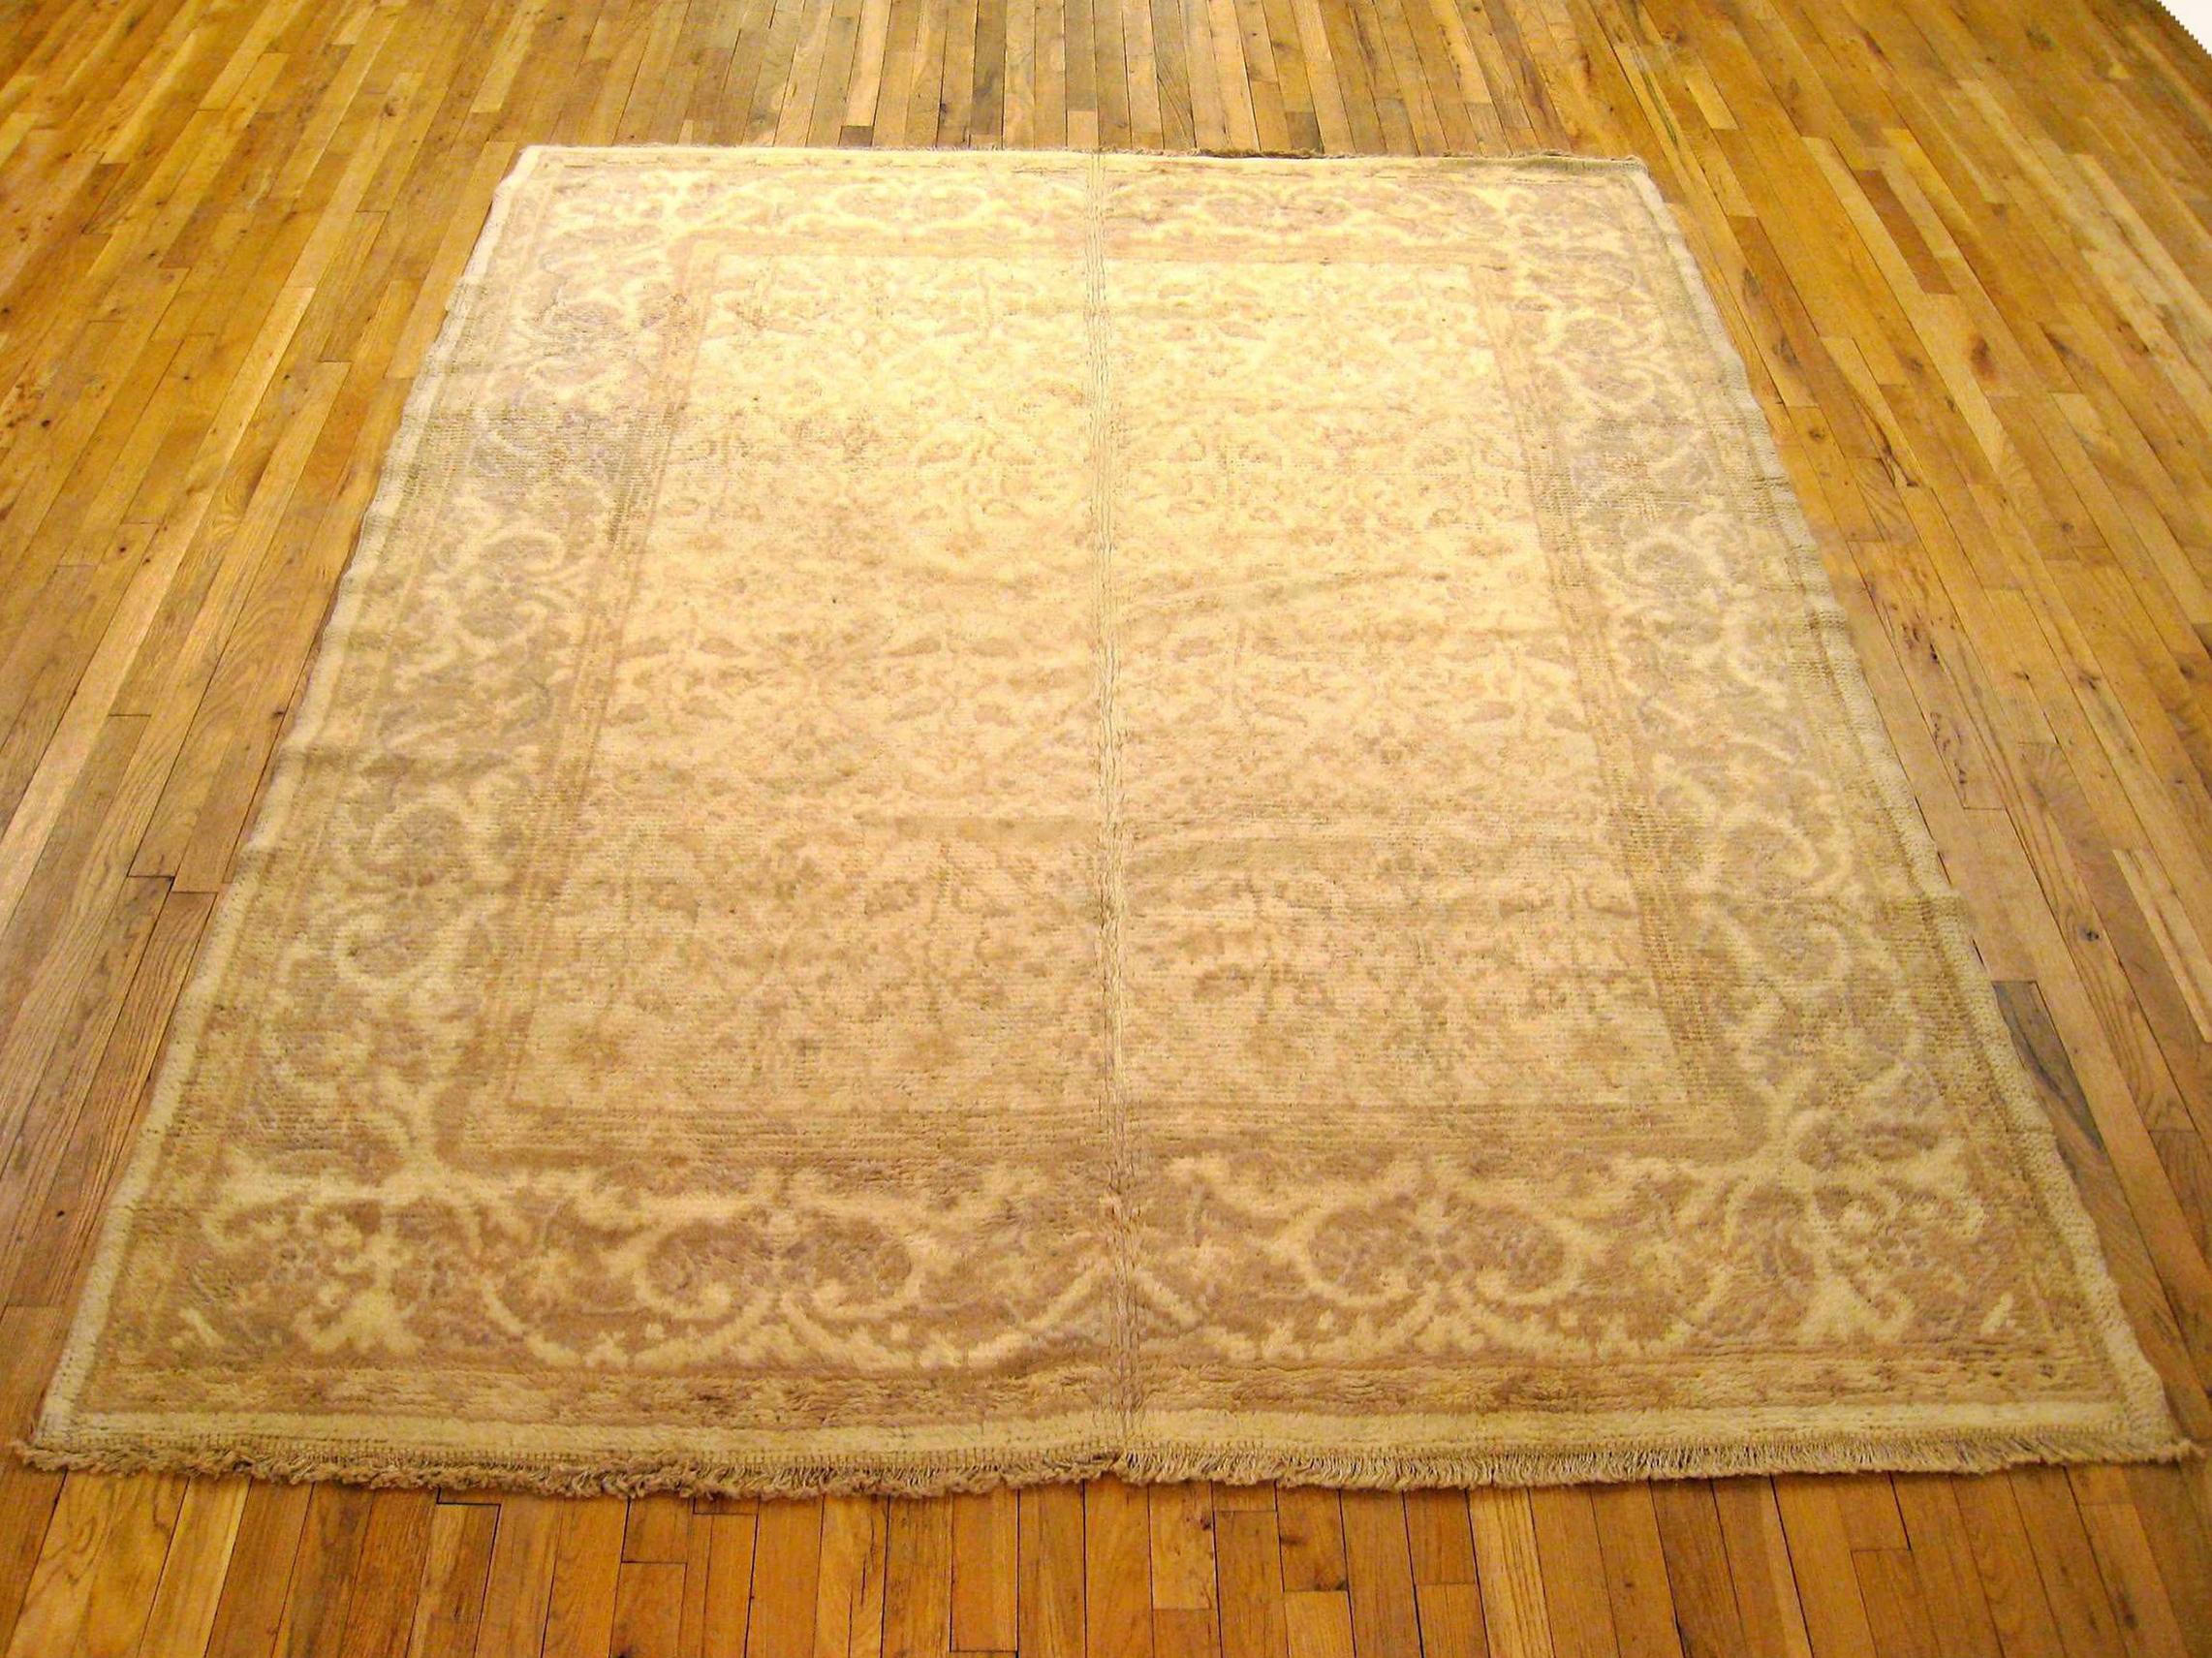 Antique Spanish rug, Room size, circa 1920

A one-of-a-kind antique Spanish Carpet, hand-knotted with short wool pile. This beautiful rug features a diamond design allover the ivory primary field, with an ivory outer border. In room size, size